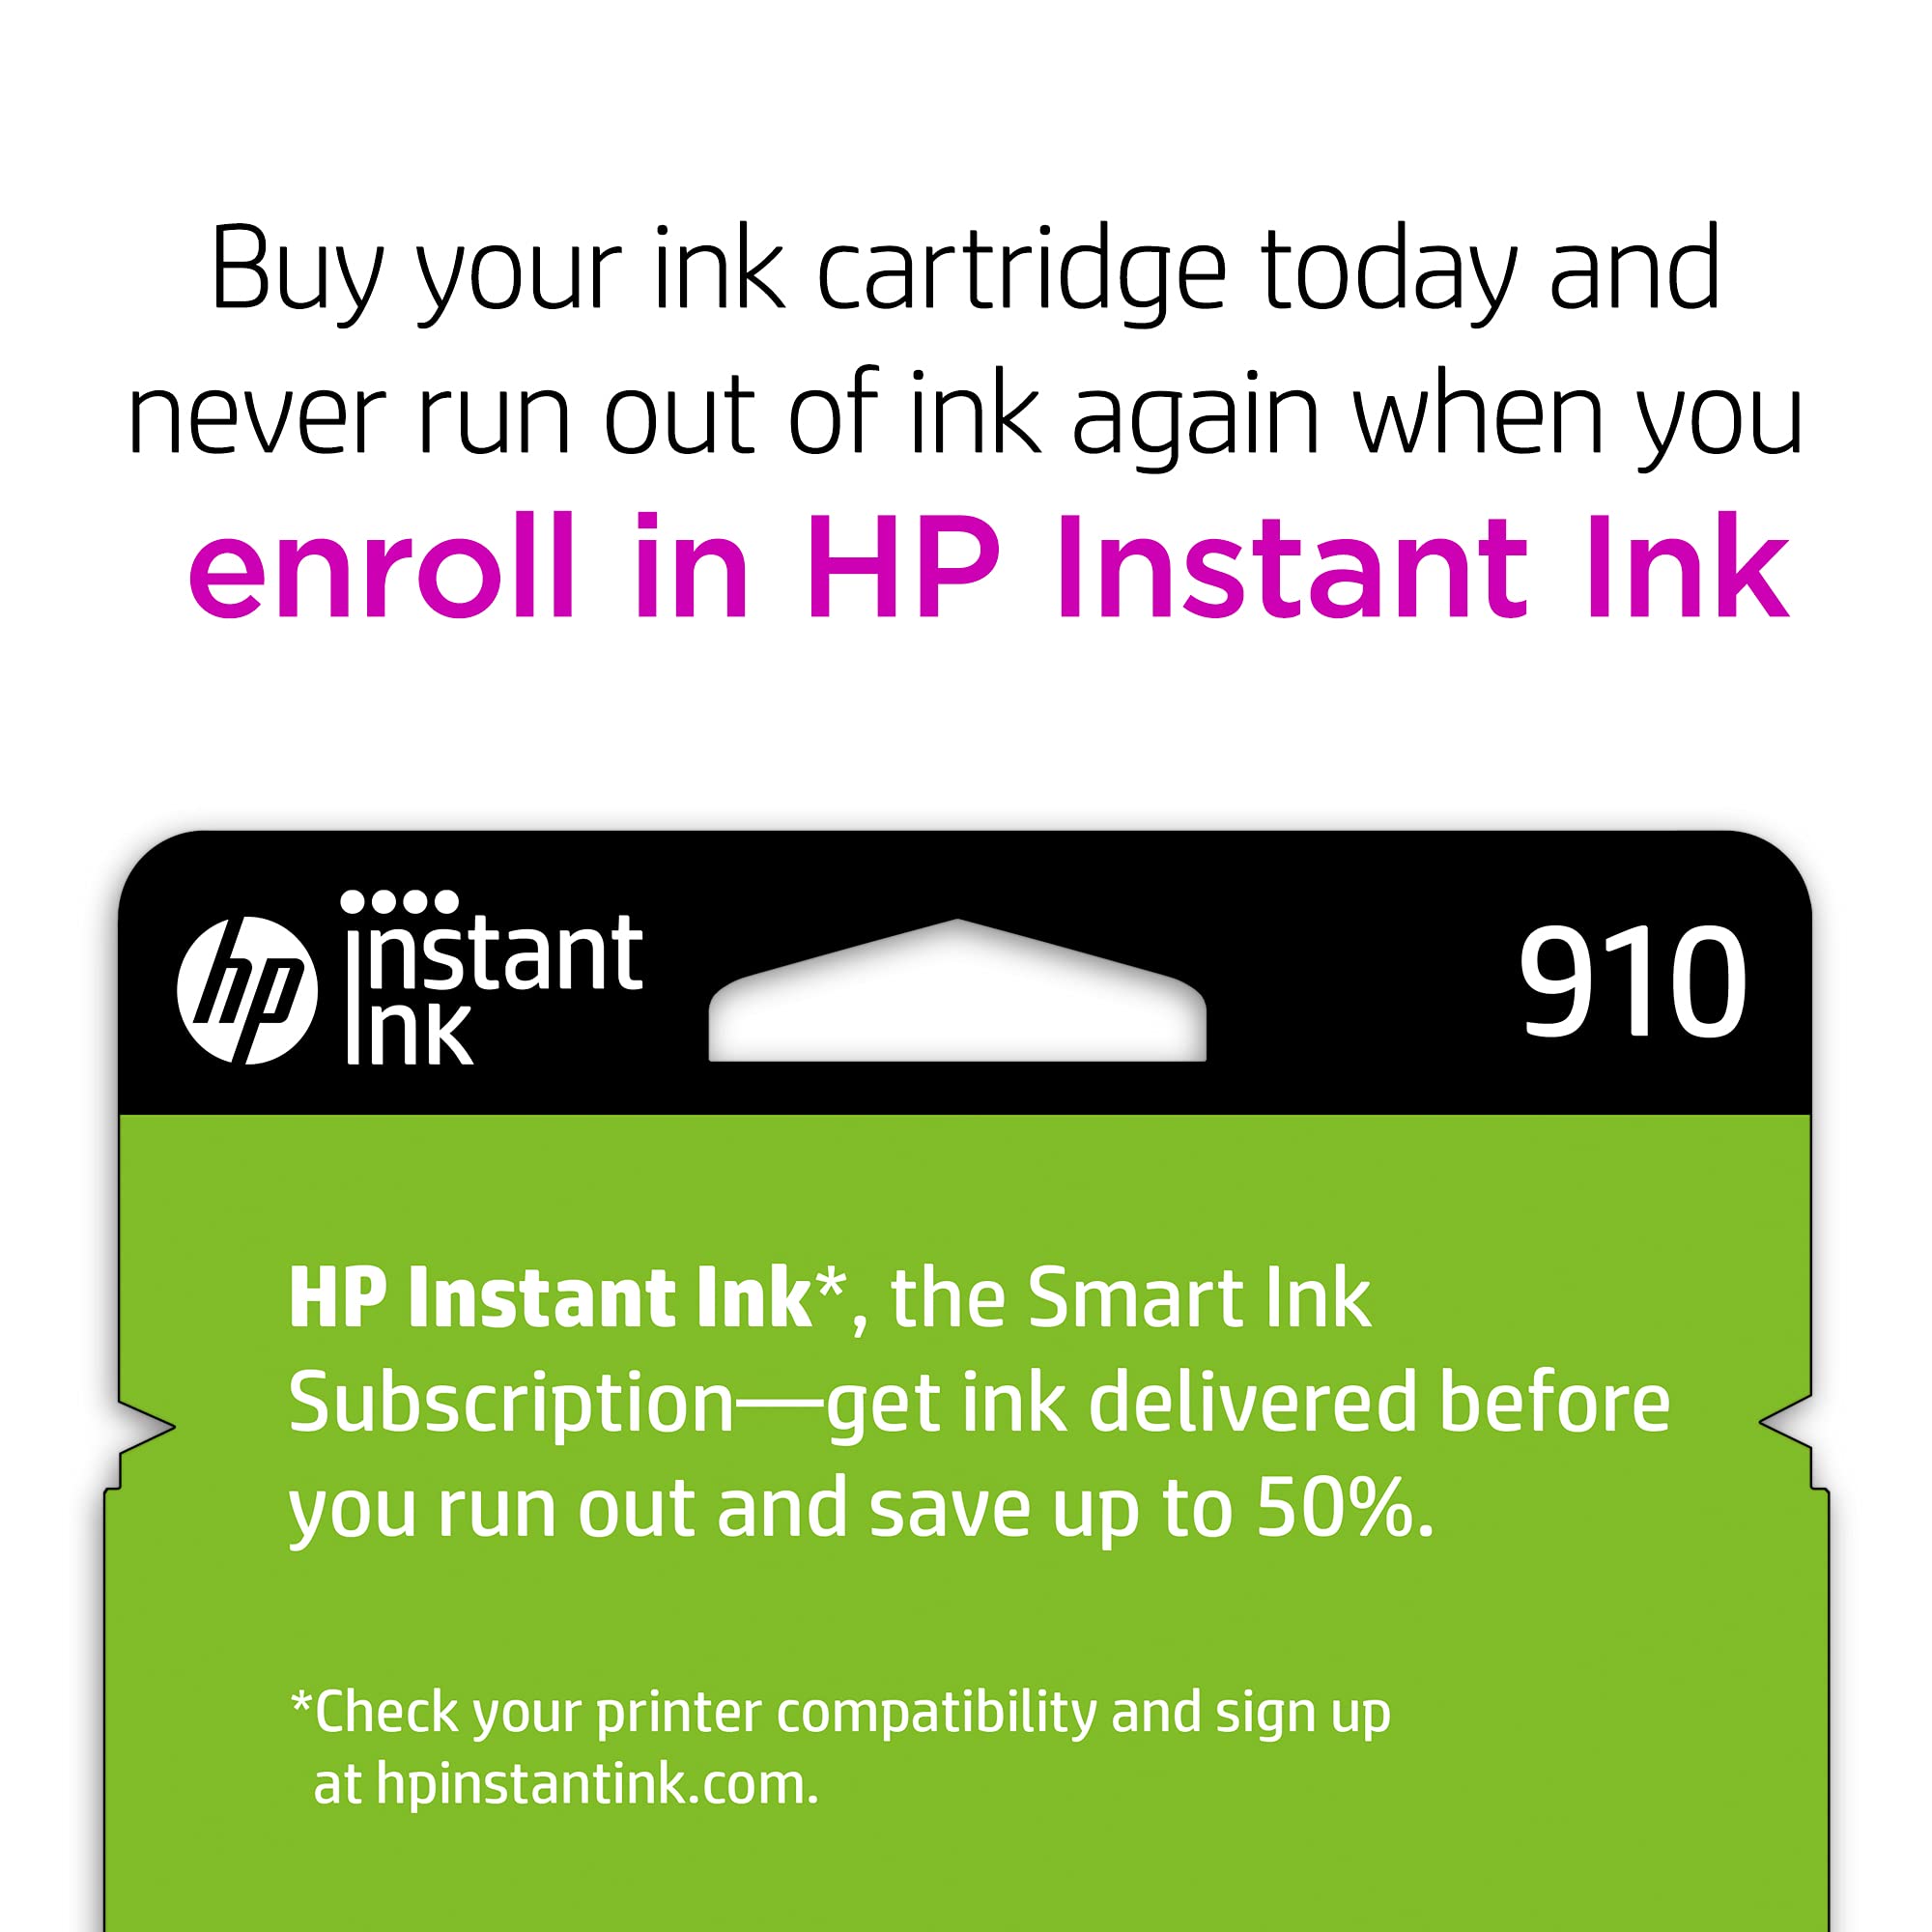 HP 910 Cyan, Magenta, Yellow Ink Cartridges (3-pack) | Works with HP OfficeJet 8010, 8020 Series, HP OfficeJet Pro 8020, 8030 Series | Eligible for Instant Ink | 3YN97AN